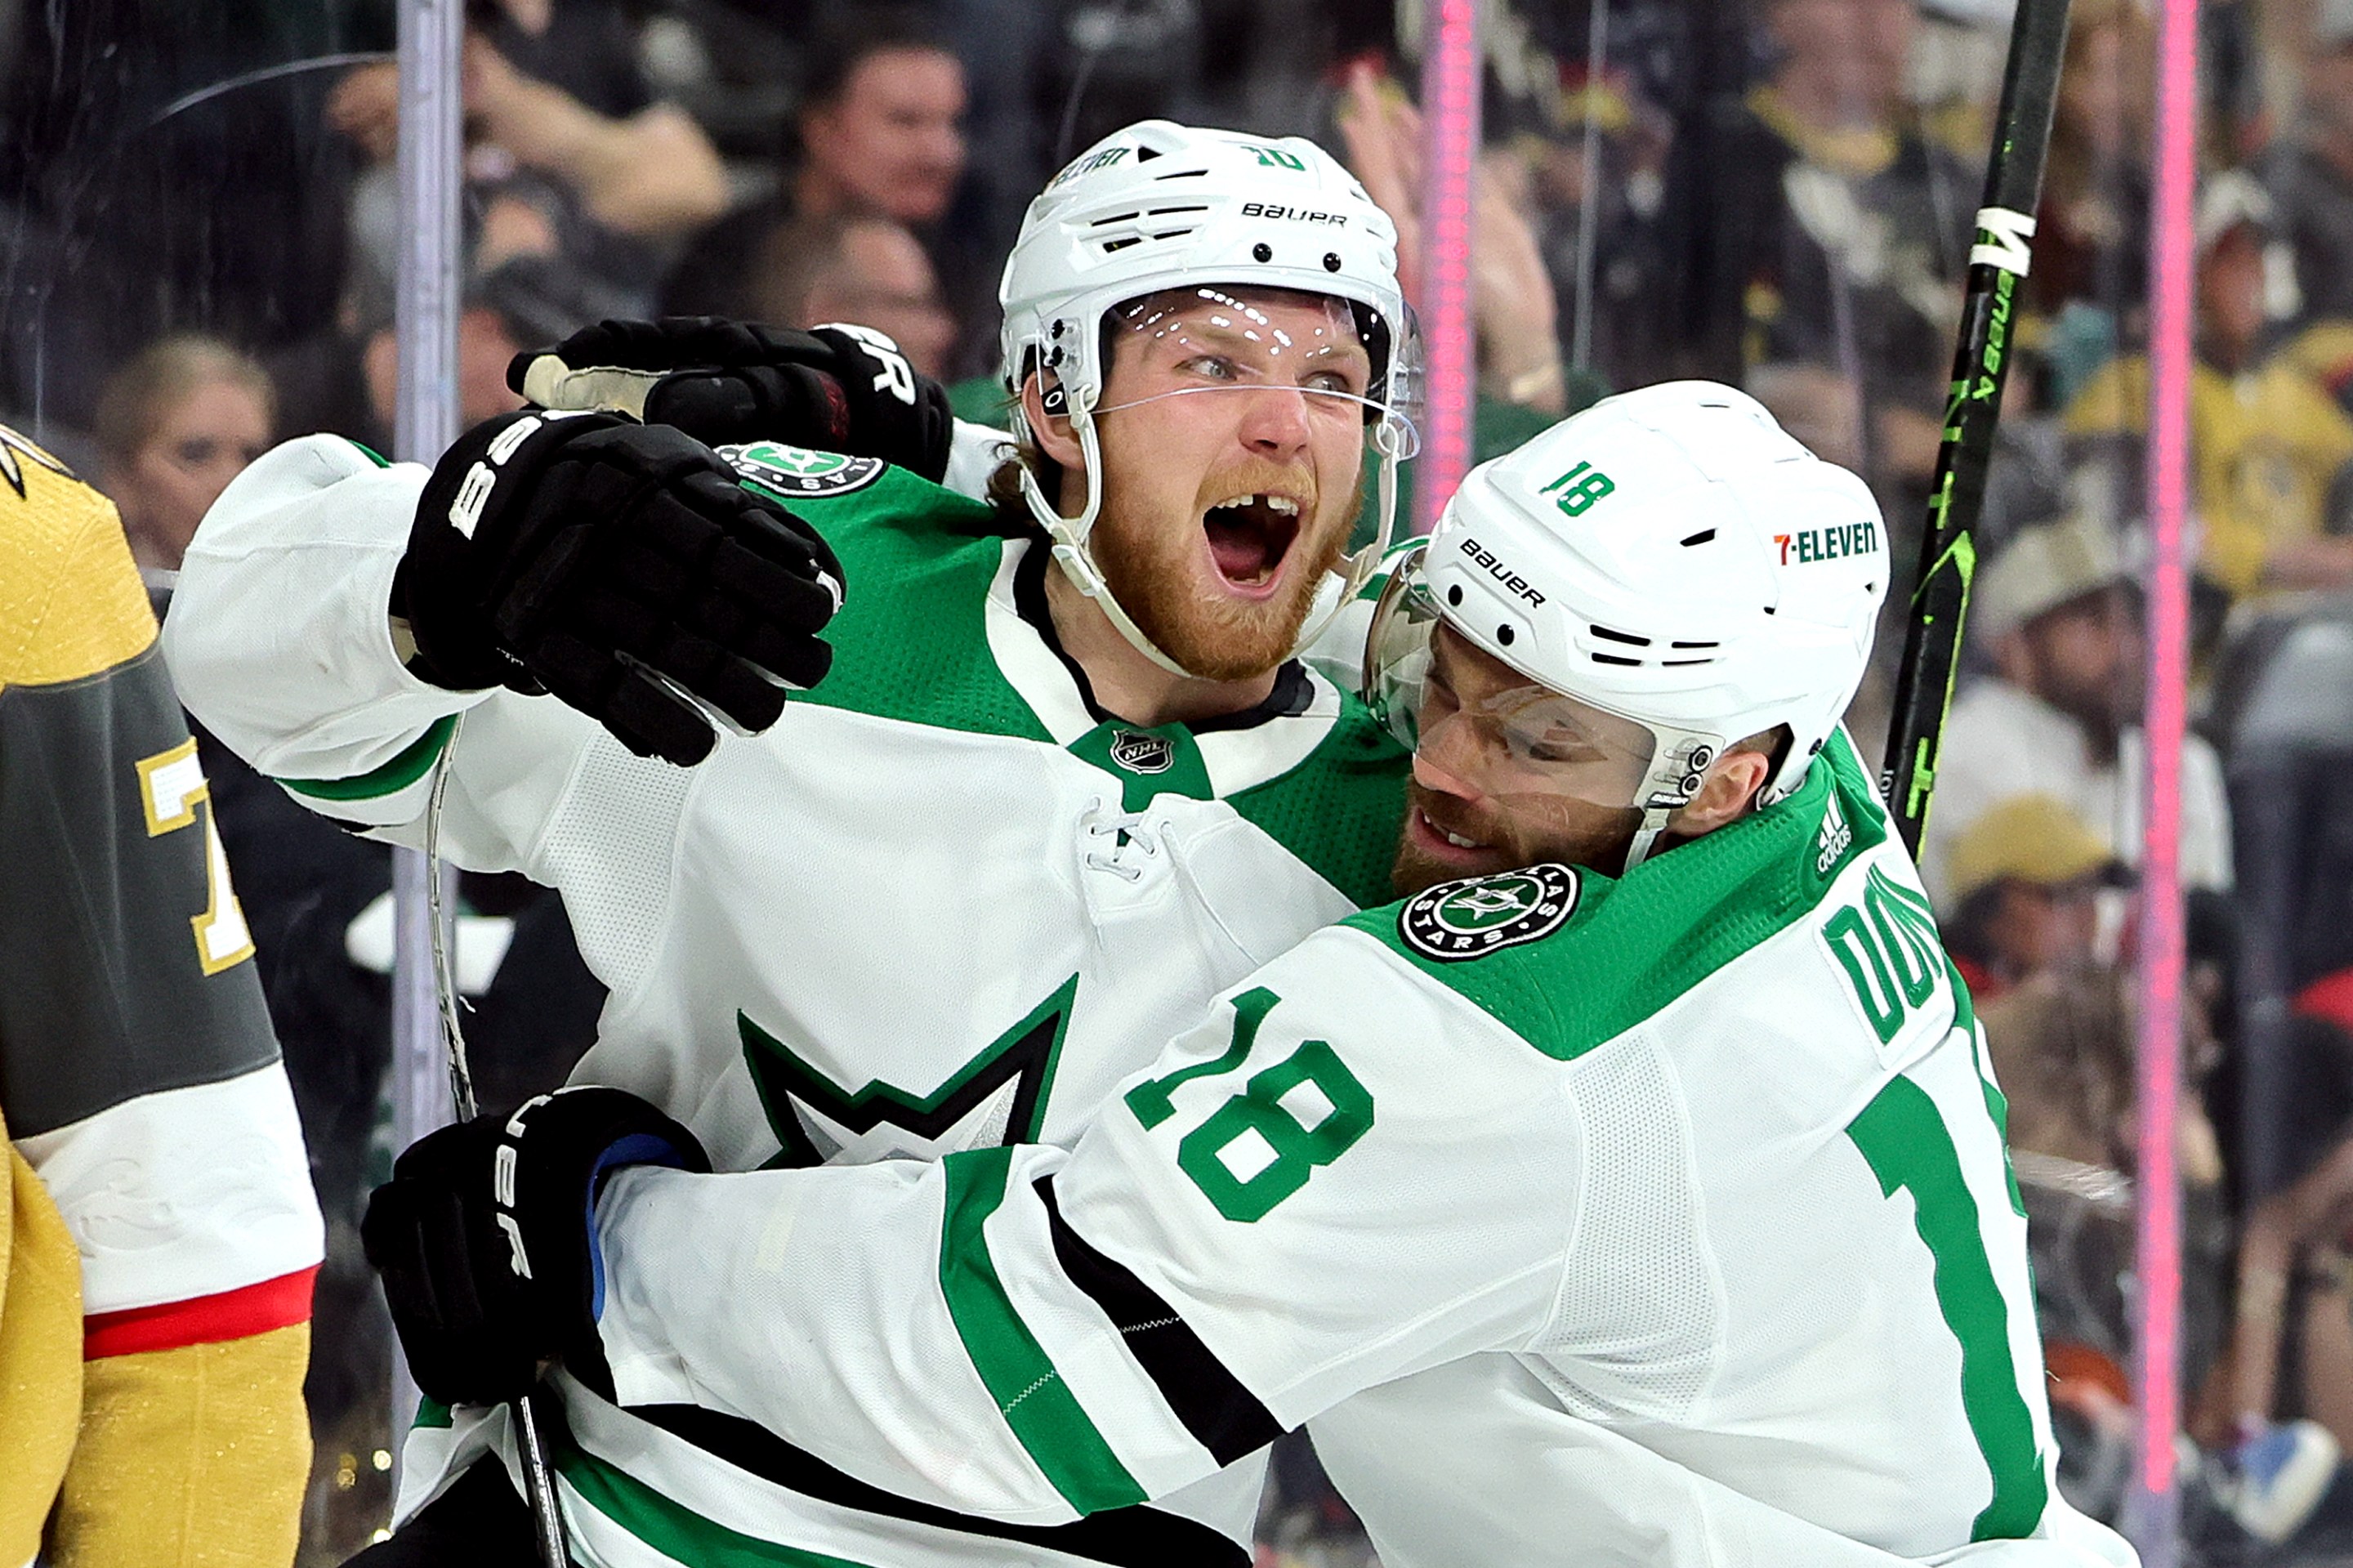 LAS VEGAS, NEVADA - MAY 27: Ty Dellandrea #10 of the Dallas Stars is congratulated by Max Domi #18 after scoring a goal against the Vegas Golden Knights during the third period in Game Five of the Western Conference Final of the 2023 Stanley Cup Playoffs at T-Mobile Arena on May 27, 2023 in Las Vegas, Nevada.